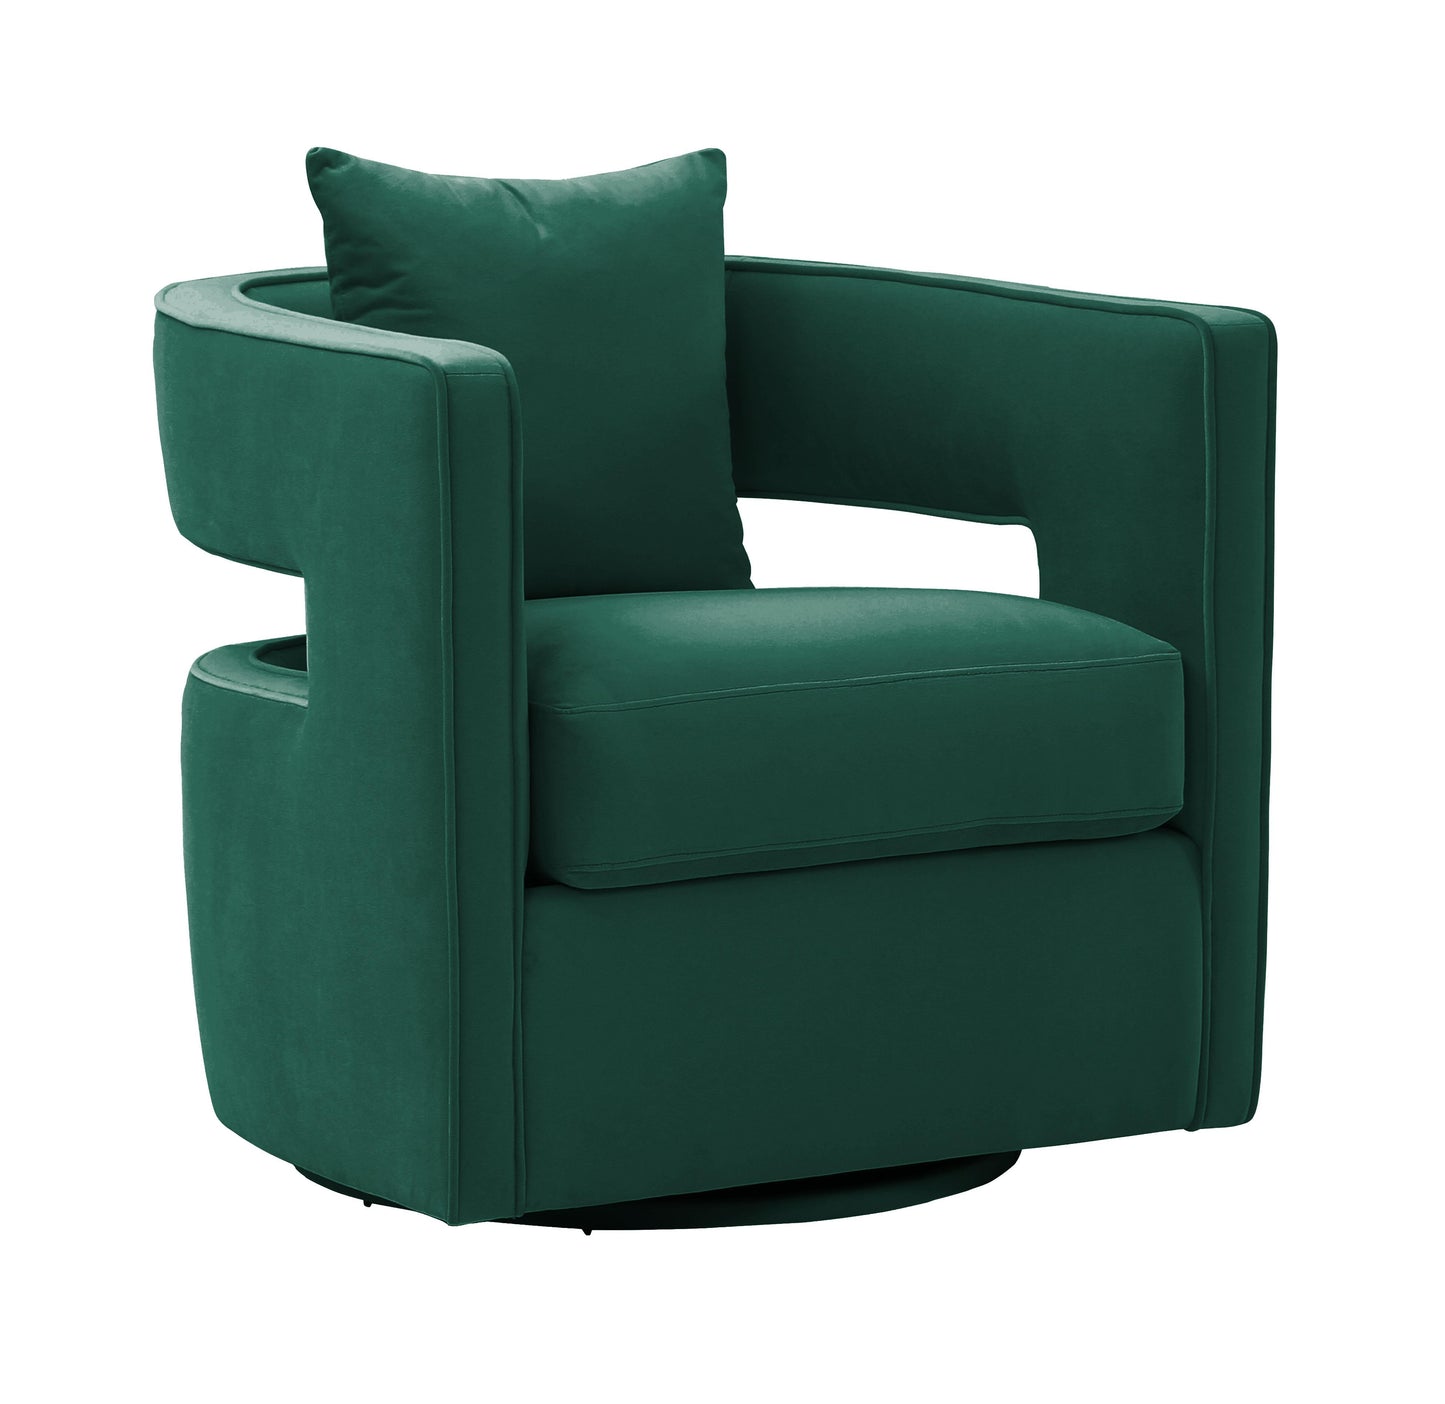 Tov Furniture Kennedy Forest Green Swivel Chair